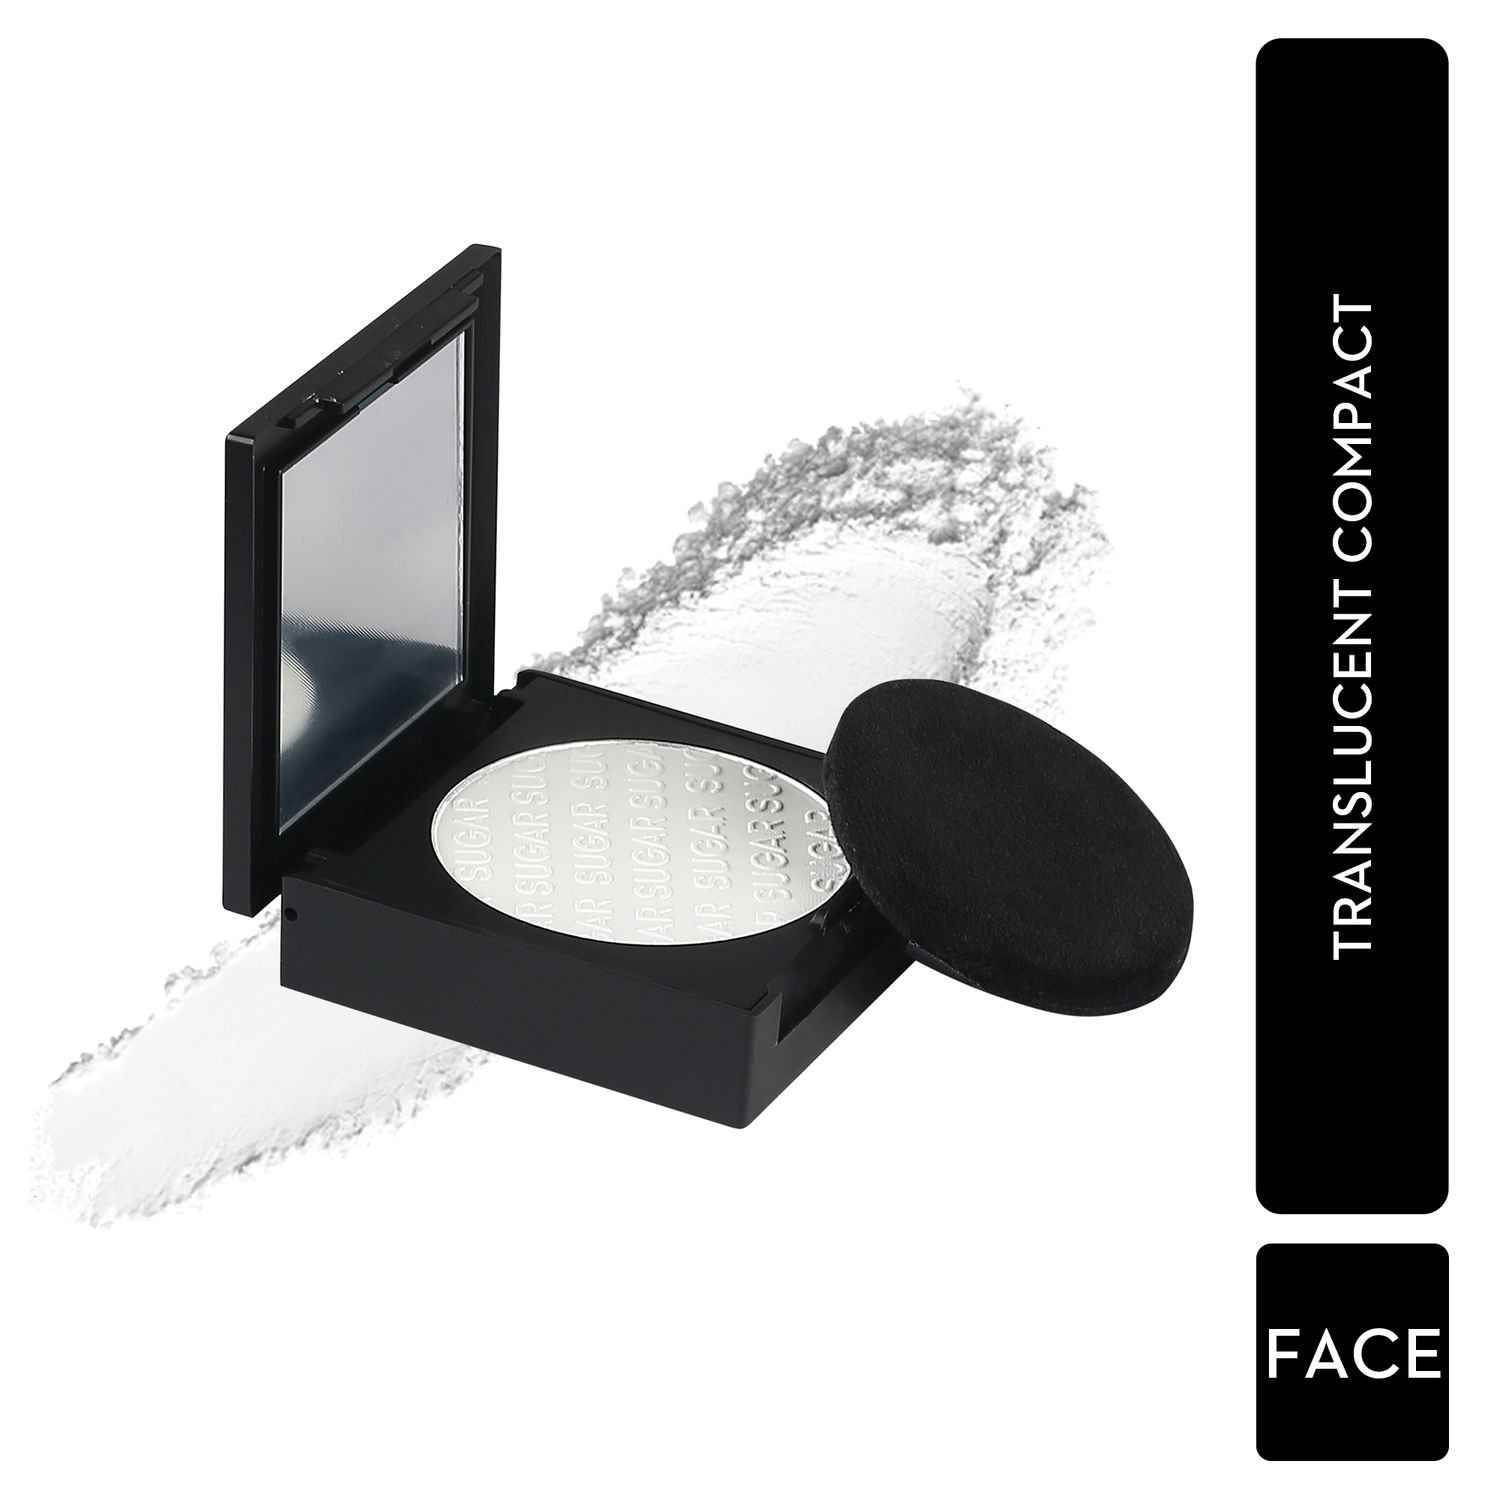 Buy SUGAR Cosmetics - Powder Play - Translucent Compact - For Matte Finish Skin, Highlight or Subtle Baking - Oil-Controlling, Smooth Application, Long Lasting - Purplle